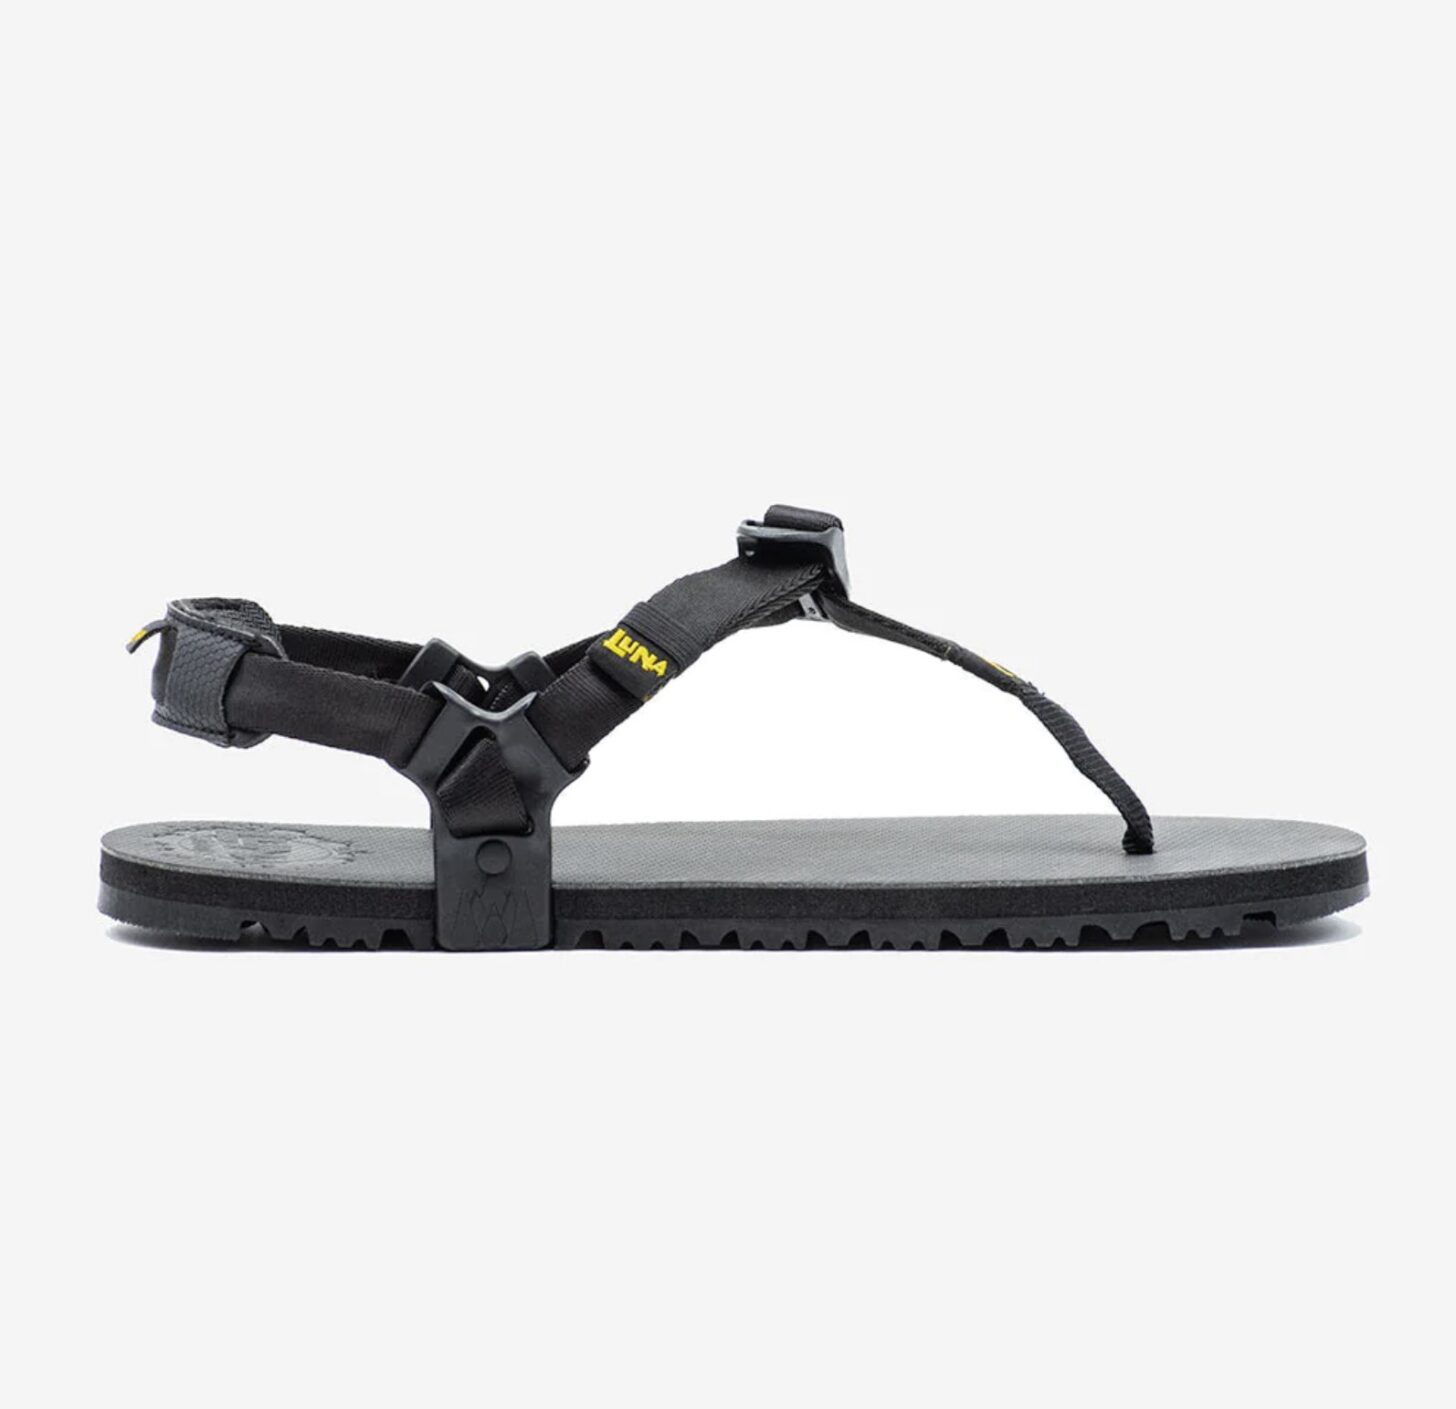 a photo of a luna sandal on a white background